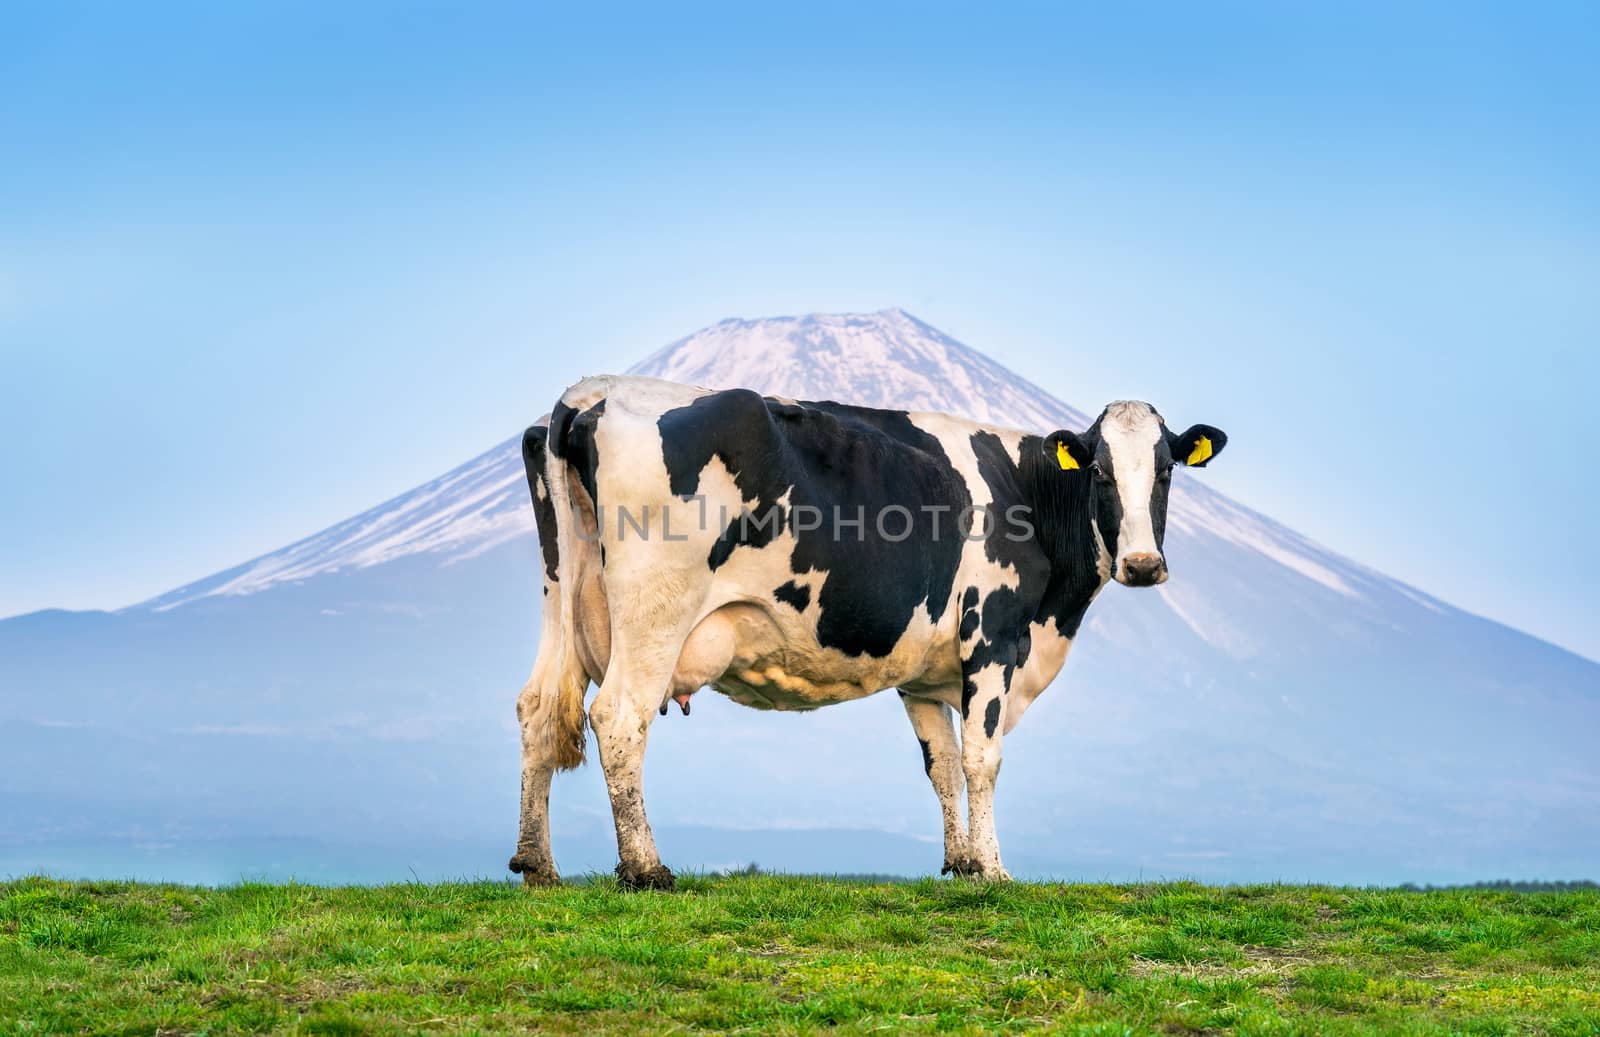 Cows standing on the green field in front of Fuji mountain, Japan.